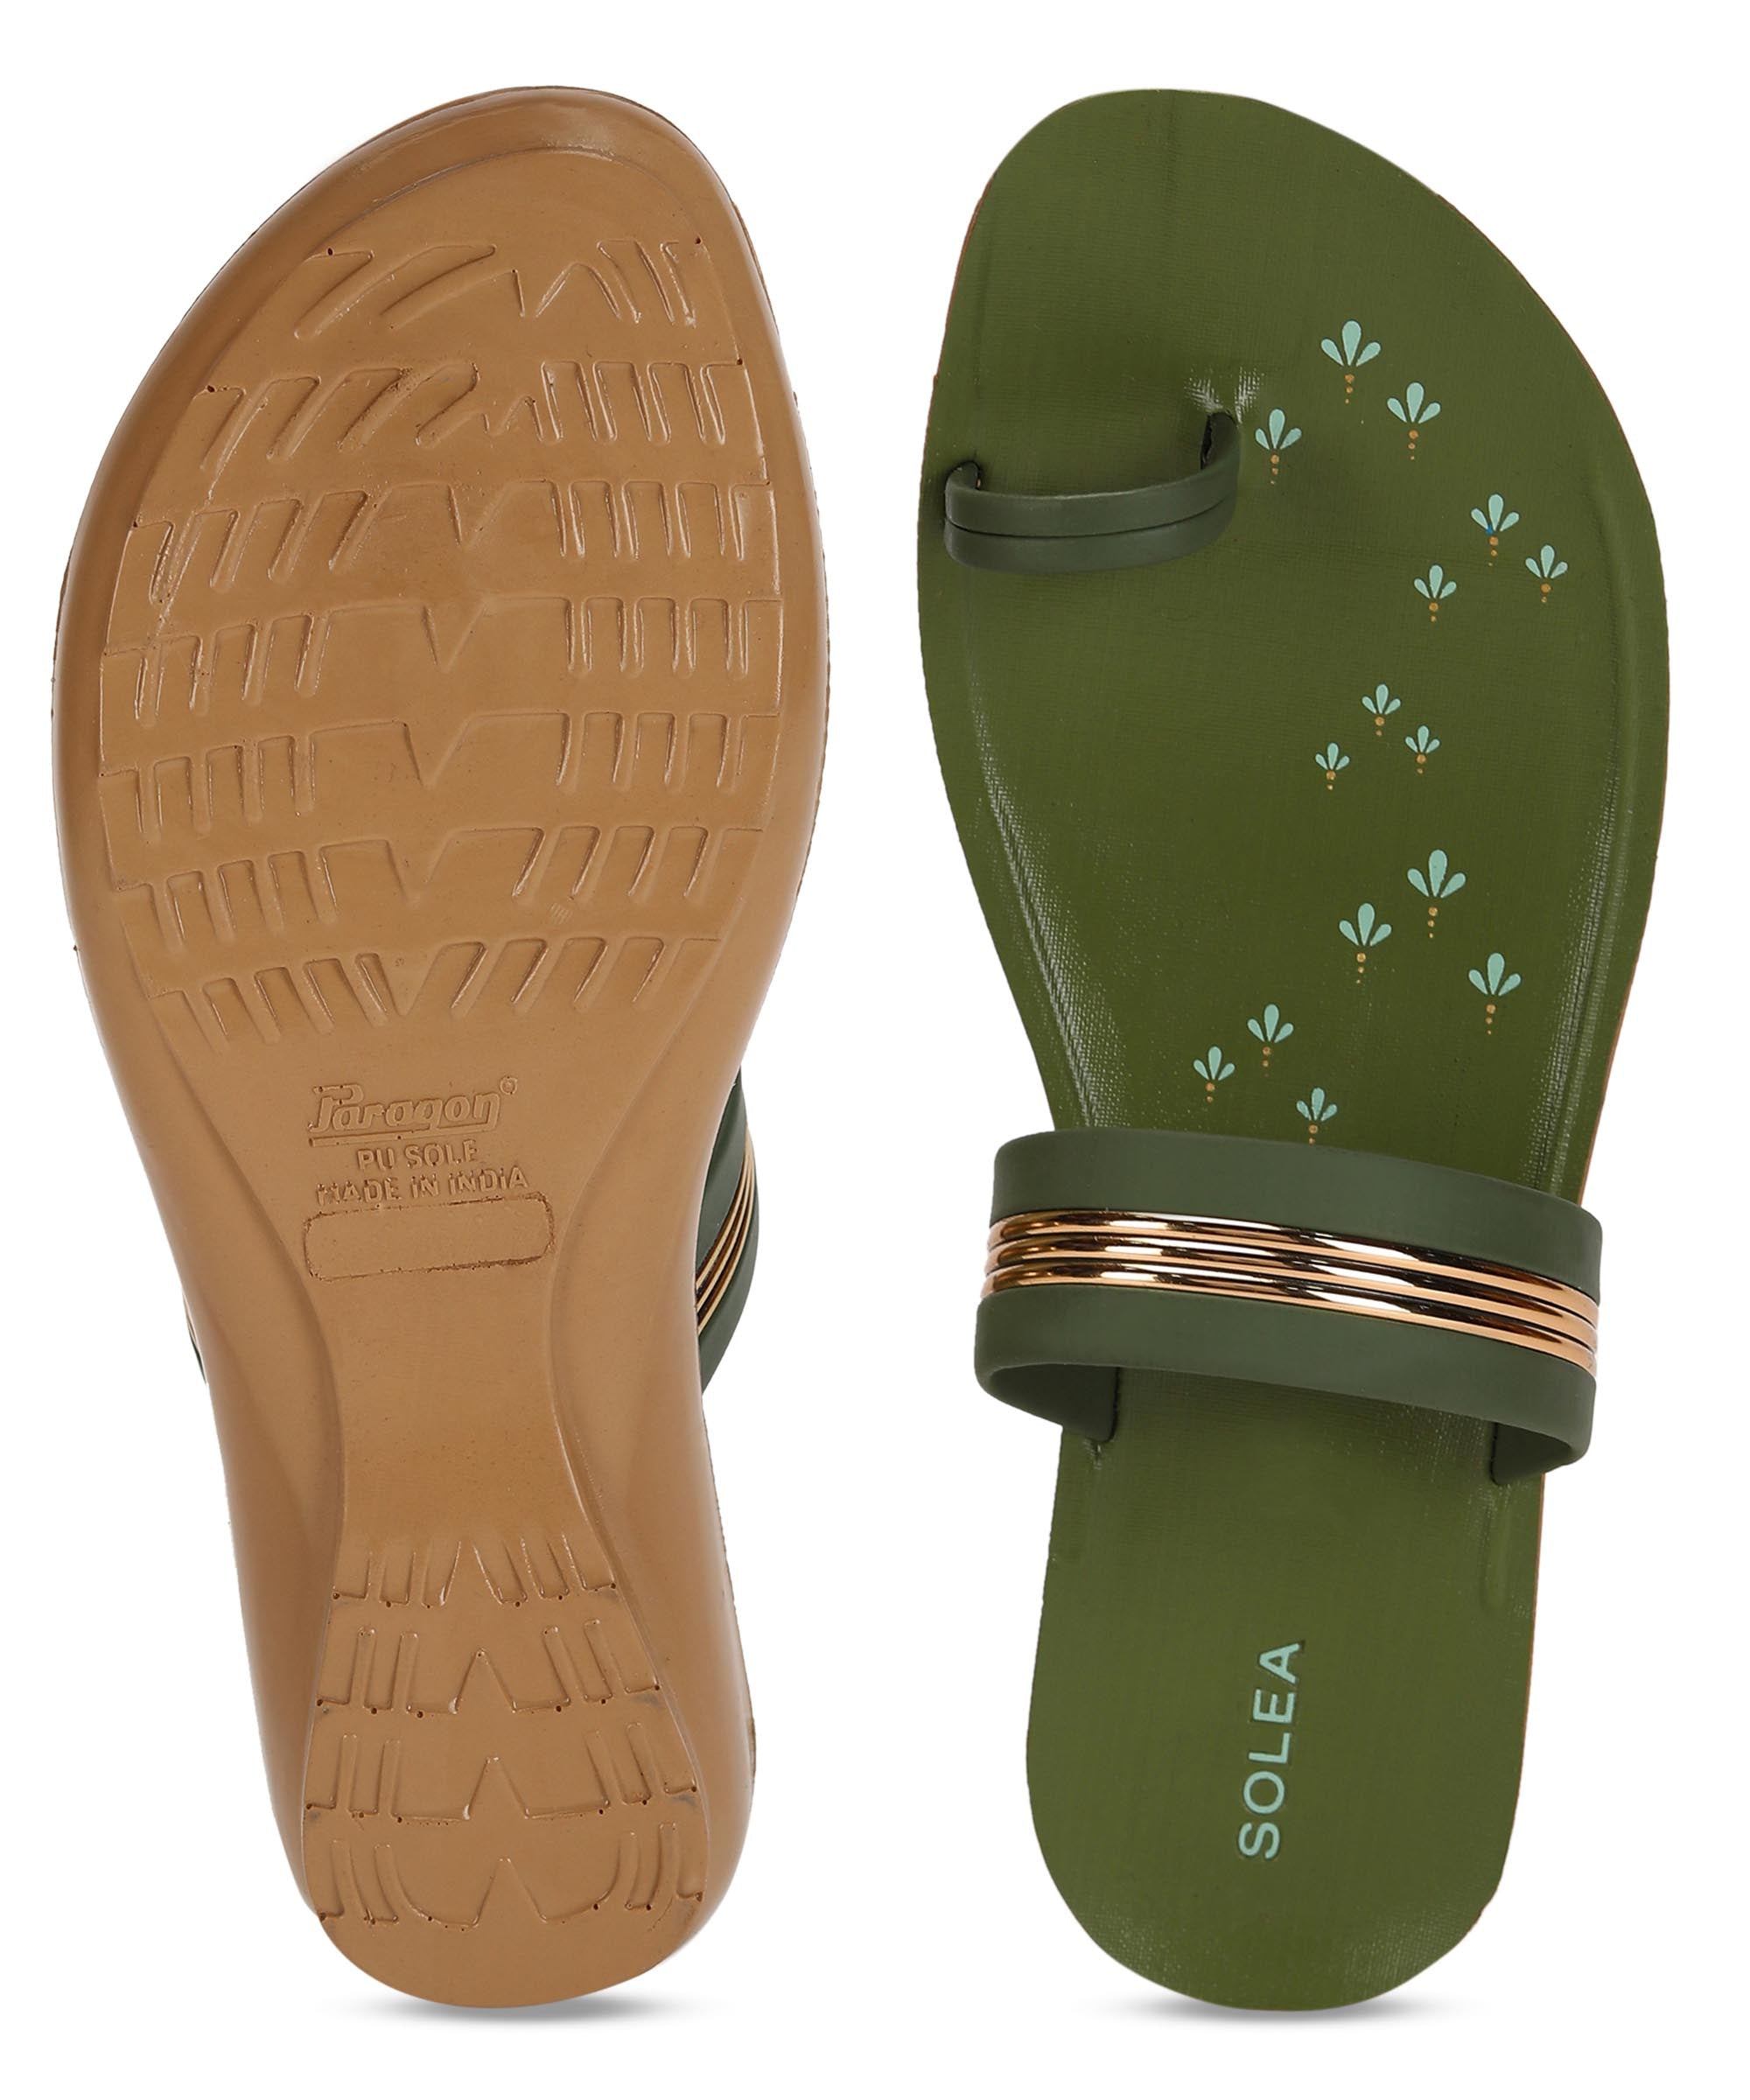 Paragon PUK7011L Women Everyday Sandals | Latest Style | Comfortable Cushioned Sole for Daily Outdoor Use